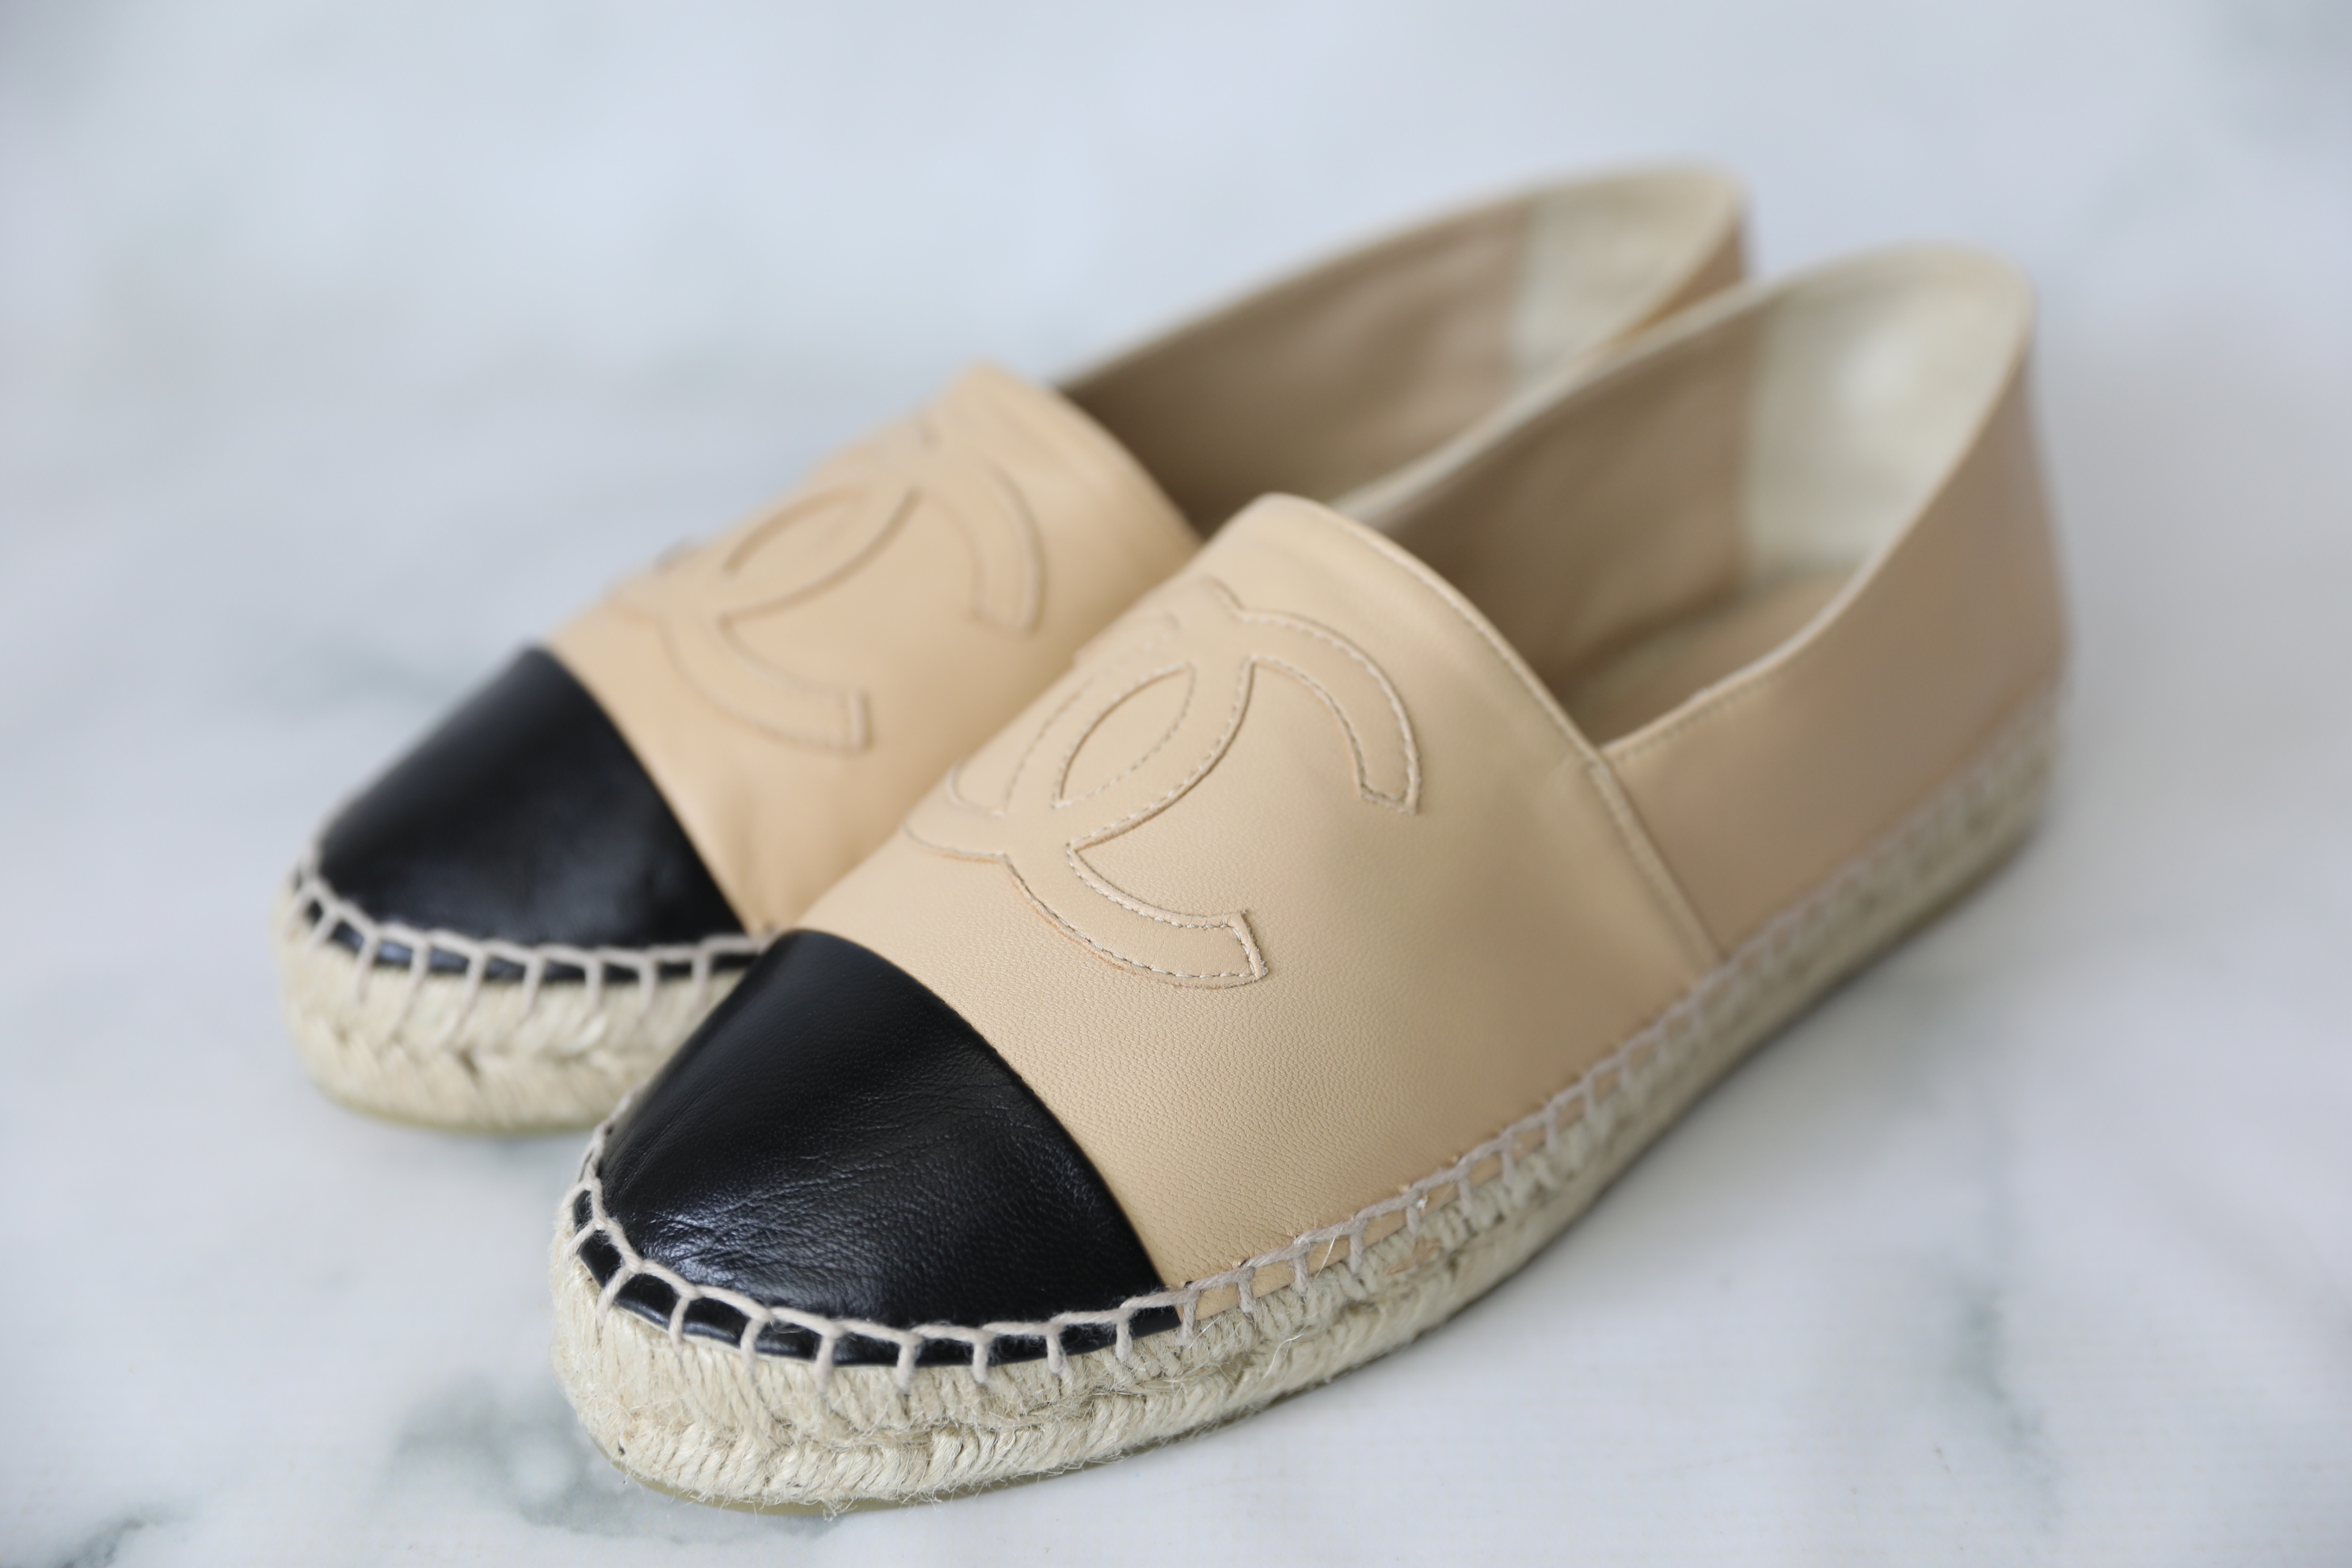 Chanel Espadrilles, Beige and Black Leather, Size 37, New no Dustbag WA001